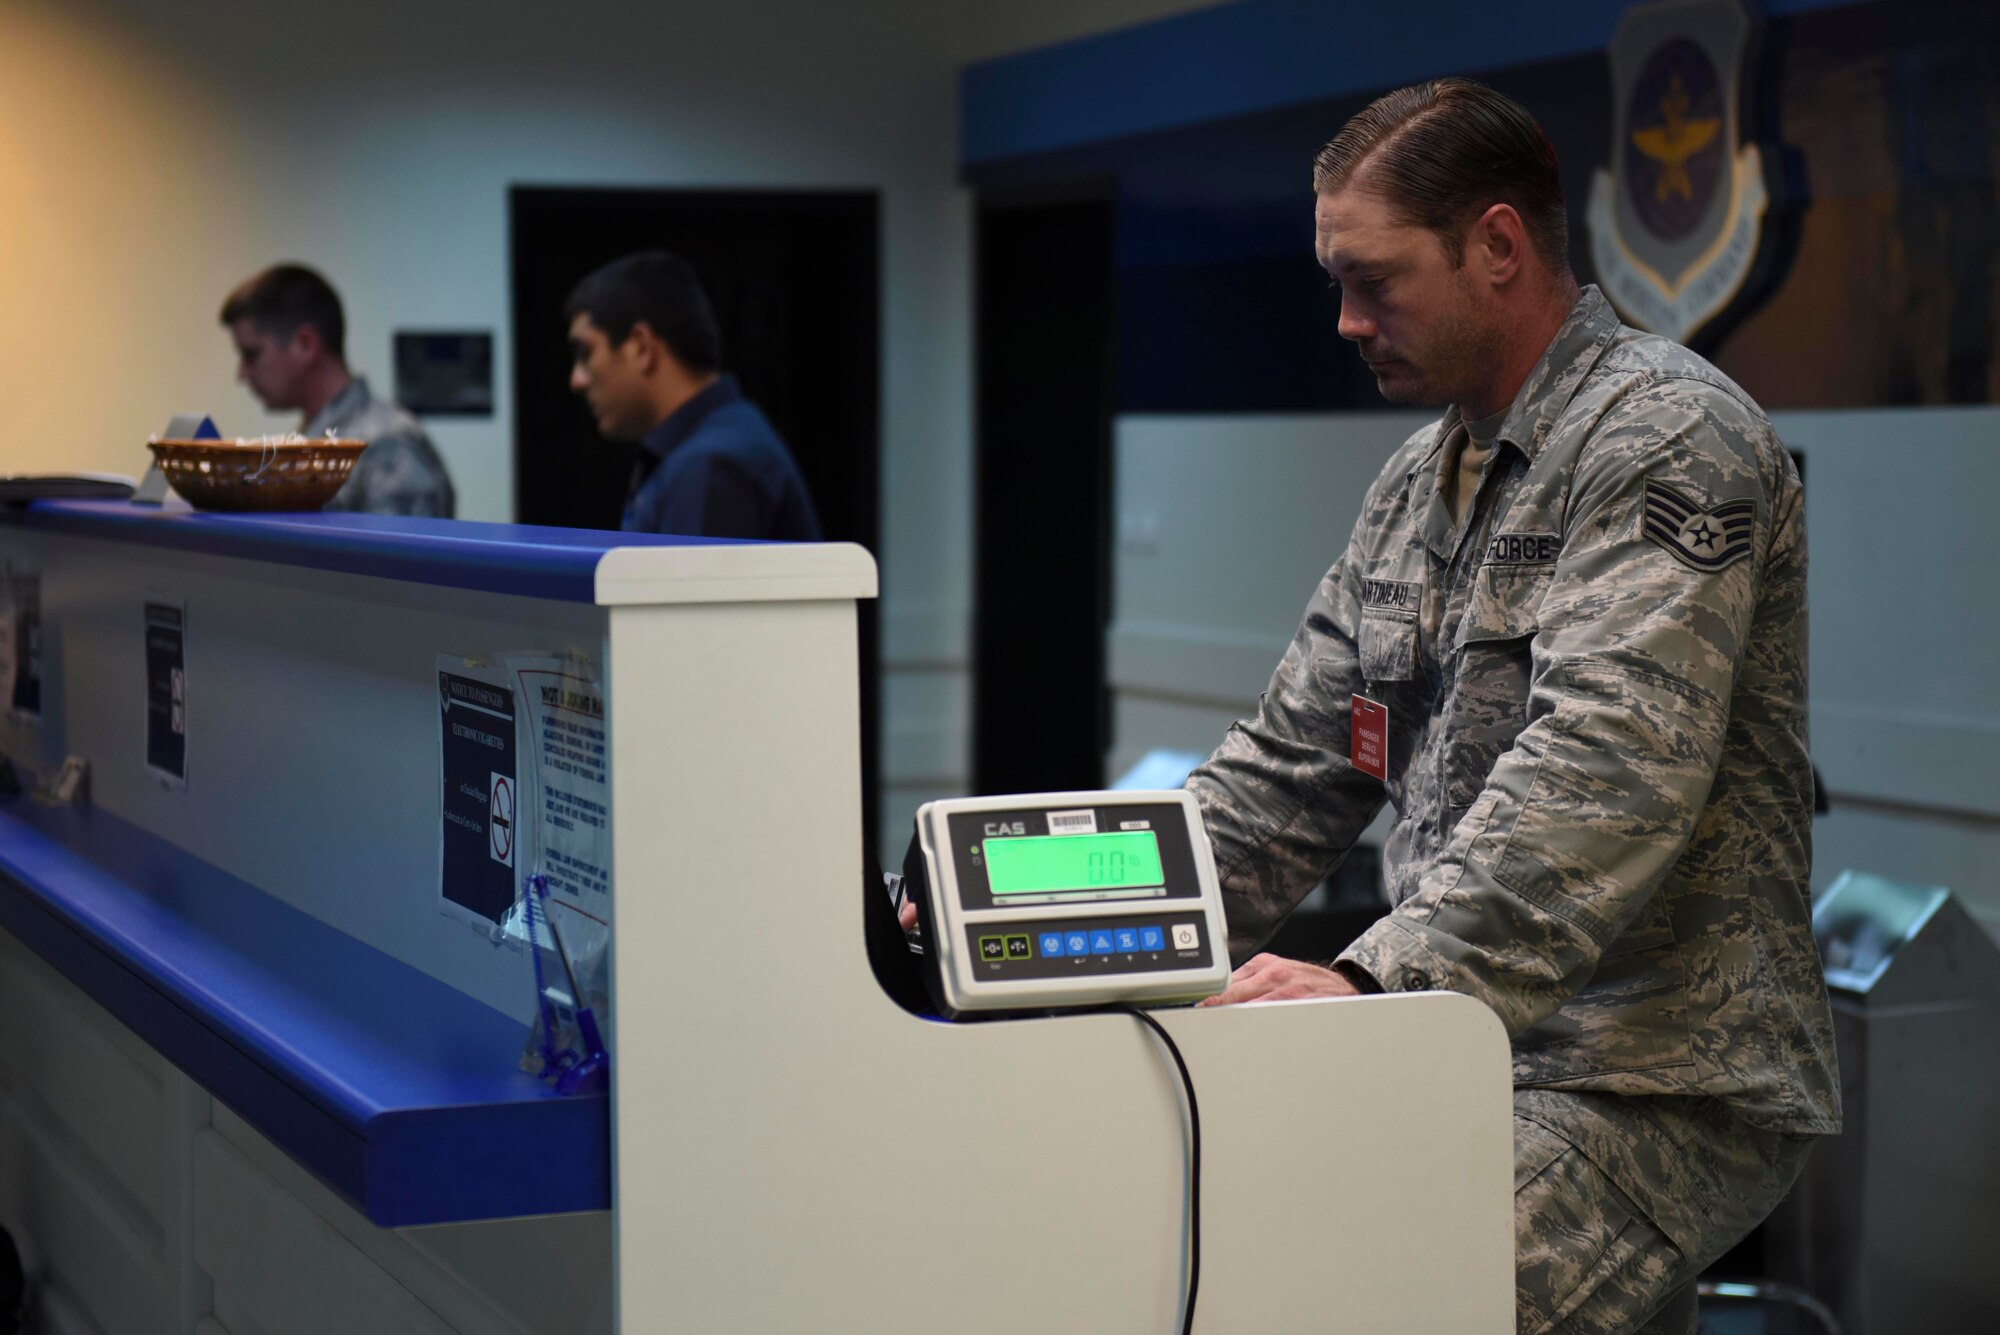 U.S. Air Force Tech. Sgt. William Martineau, 728th Air Mobility Squadron passenger service supervisor, reads a computer screen July 13, 2016, at Incirlik Air Base, Turkey. The customer service desk is responsible for issuing tickets, checking in passengers’ baggage and ensure the travelers get through the gate to leave on time. (U.S. Air Force photo by Airman 1st Class Devin M. Rumbaugh)